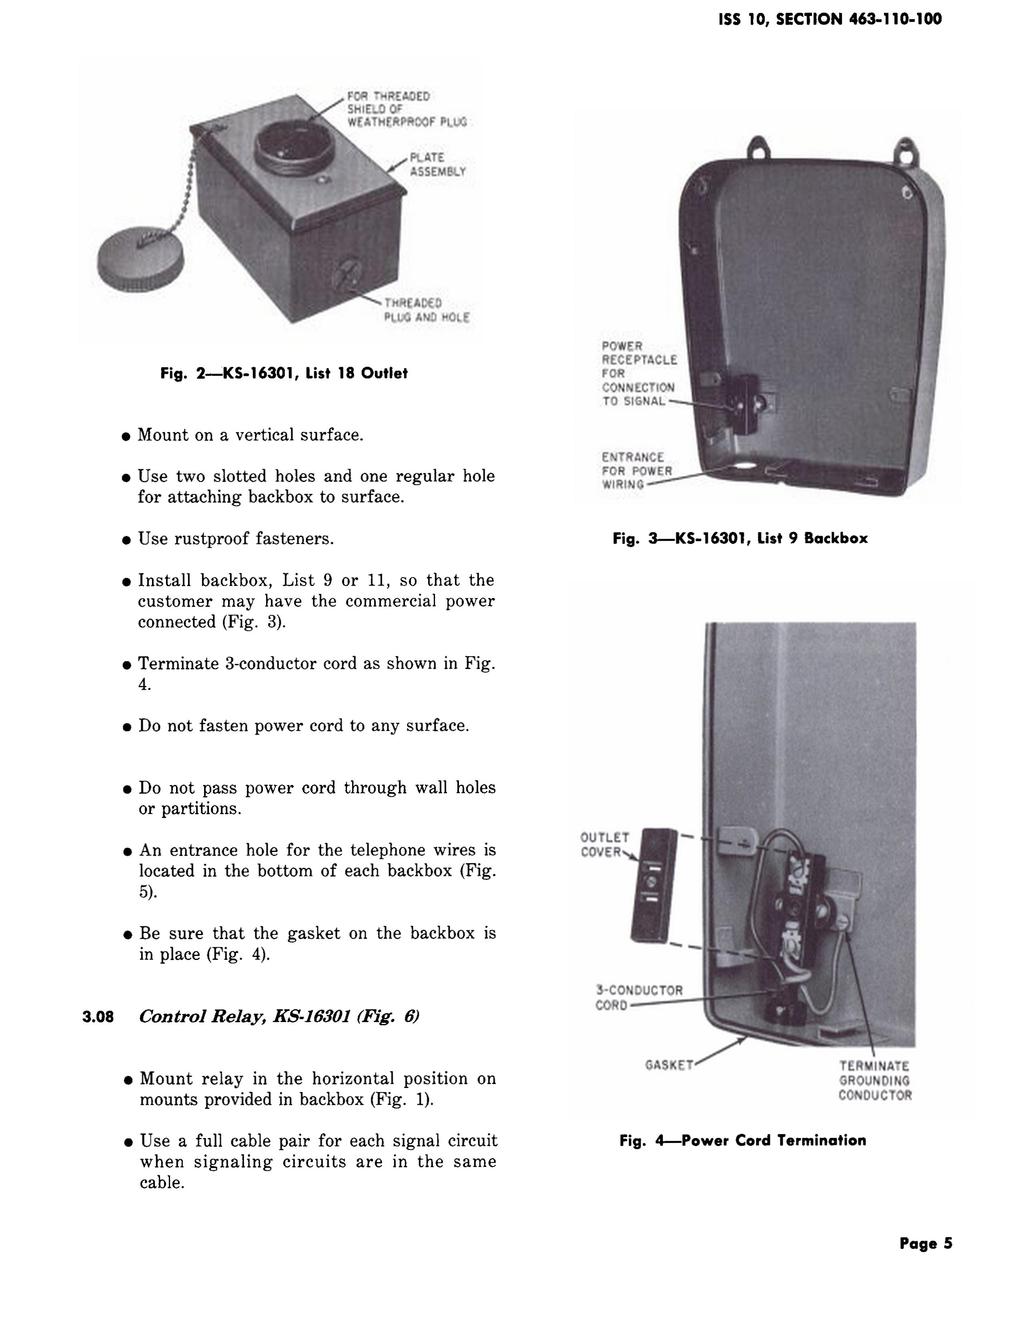 SS 10, SECTON 463-110-100 Fig. 2...:Ks-1630 1, List 18 Outlet Mount on a vertical surface. Use two slotted holes and one regular hole for attaching backbox to surface. Use rustproof fasteners. Fig. 3--KS-16301, List 9 Backbox nstall backbox, List 9 or 11, so that the customer may have the commercial power connected (Fig.